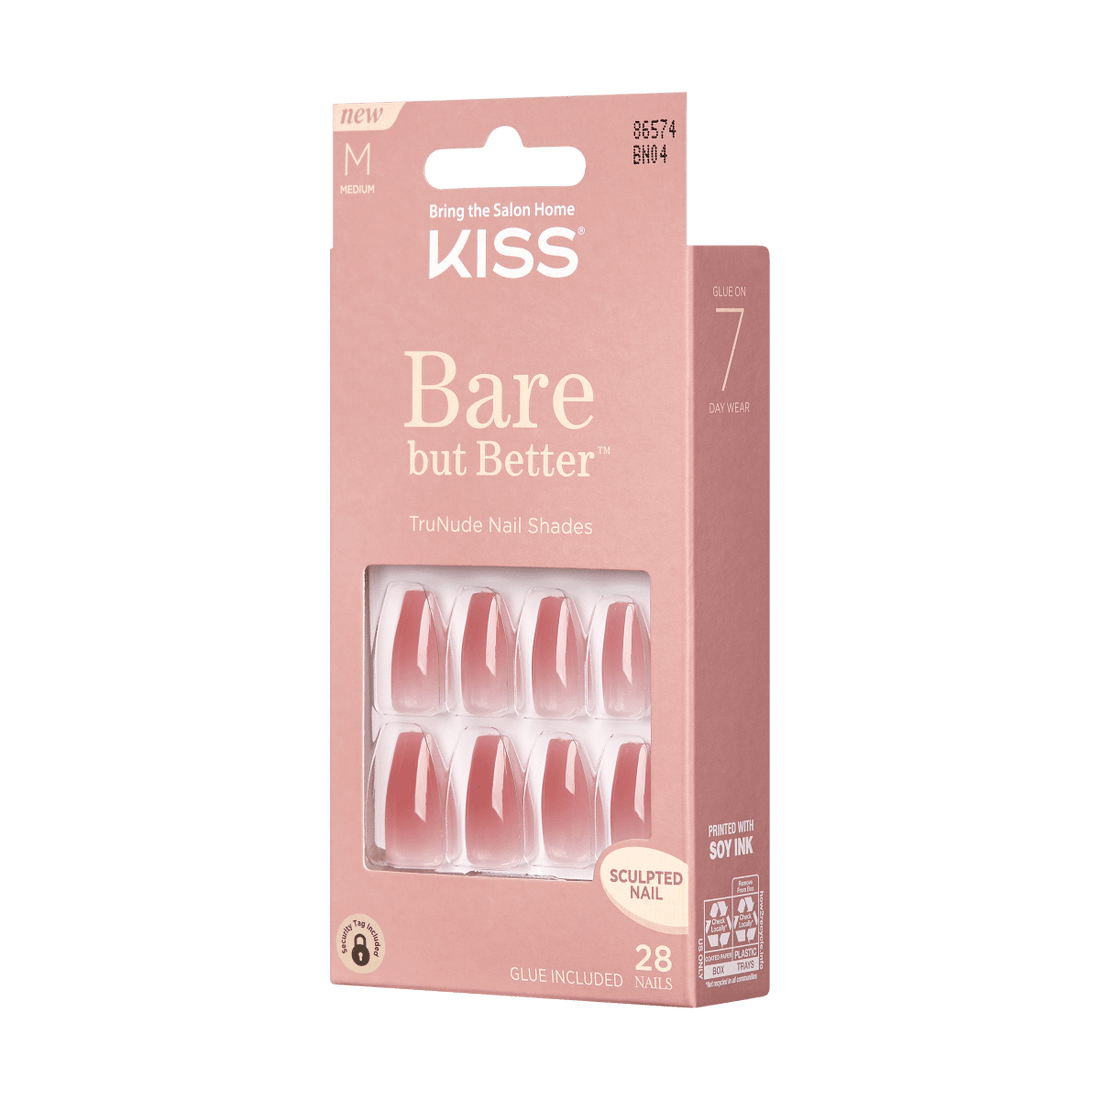 KISS Bare But Better, Press-On Nails, Nude Nude, Nude, Med Coffin, 28ct